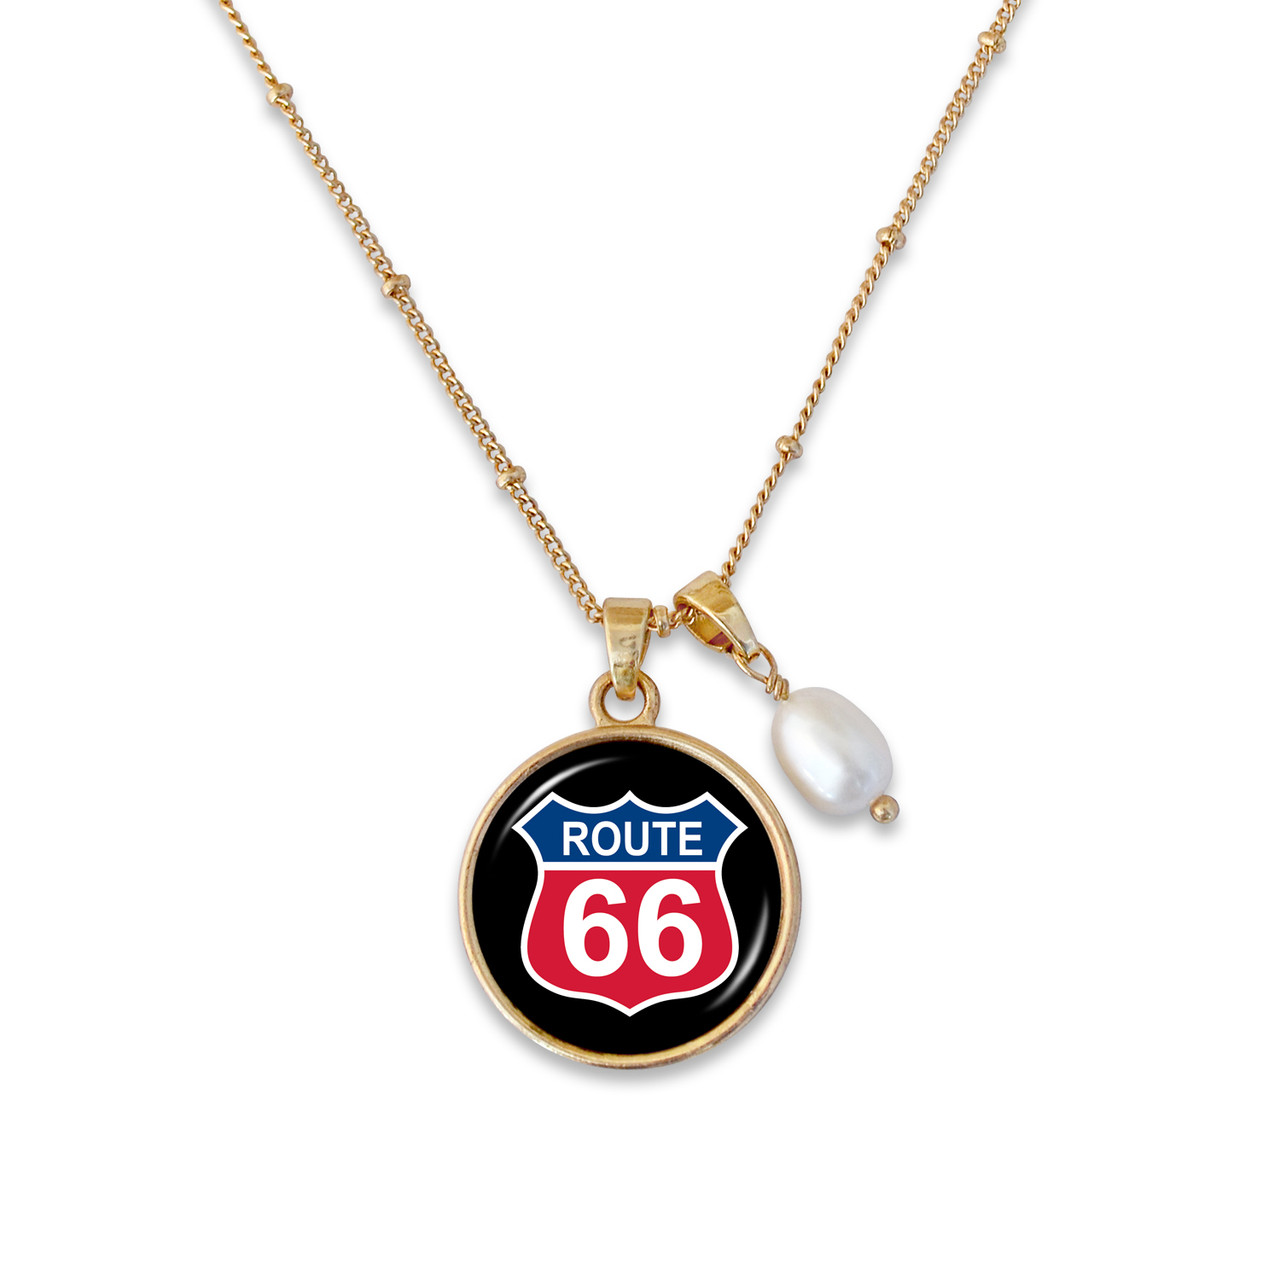 Route 66 Diana Necklace